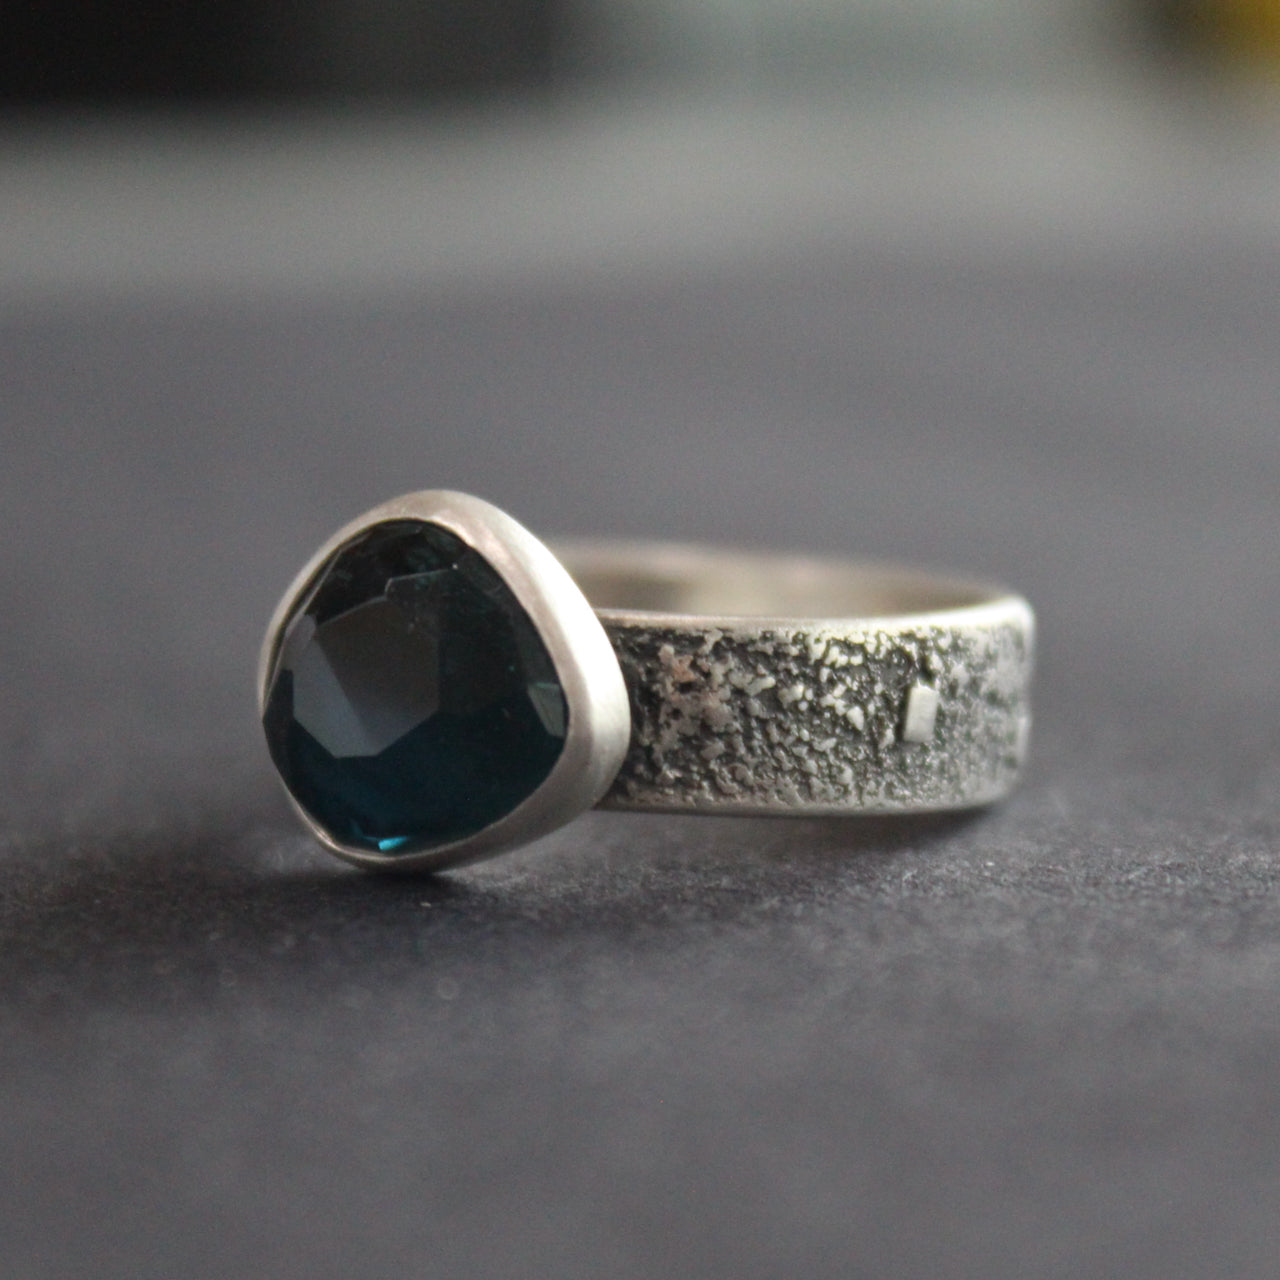 Blue tourmaline stone set in a textured silver ring 